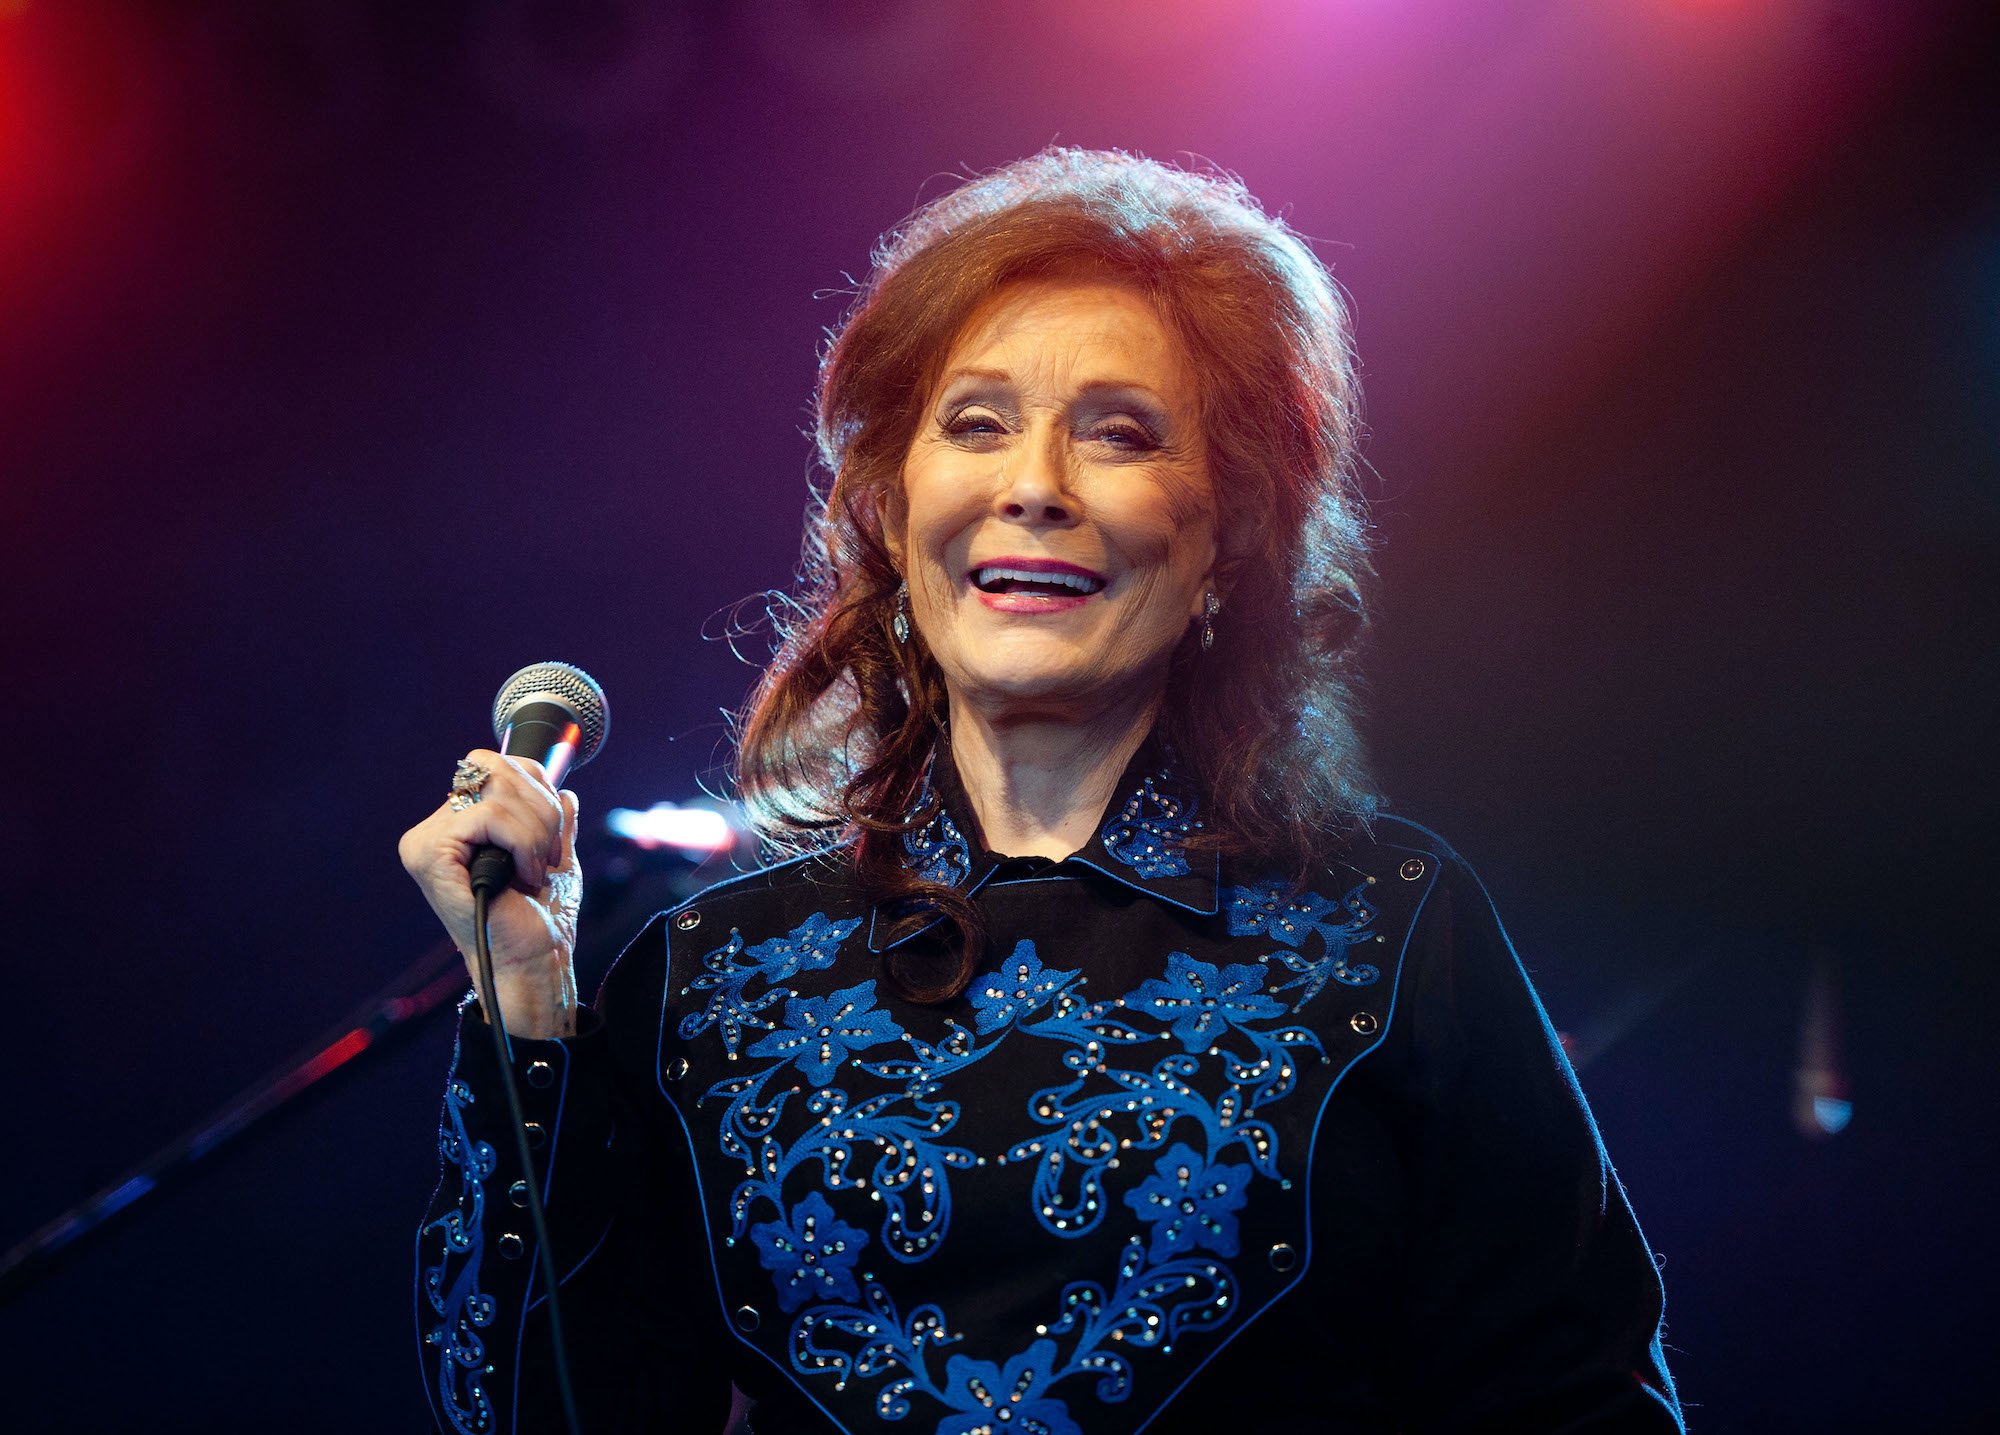 Loretta Lynn smiling on stage, holding a microphone